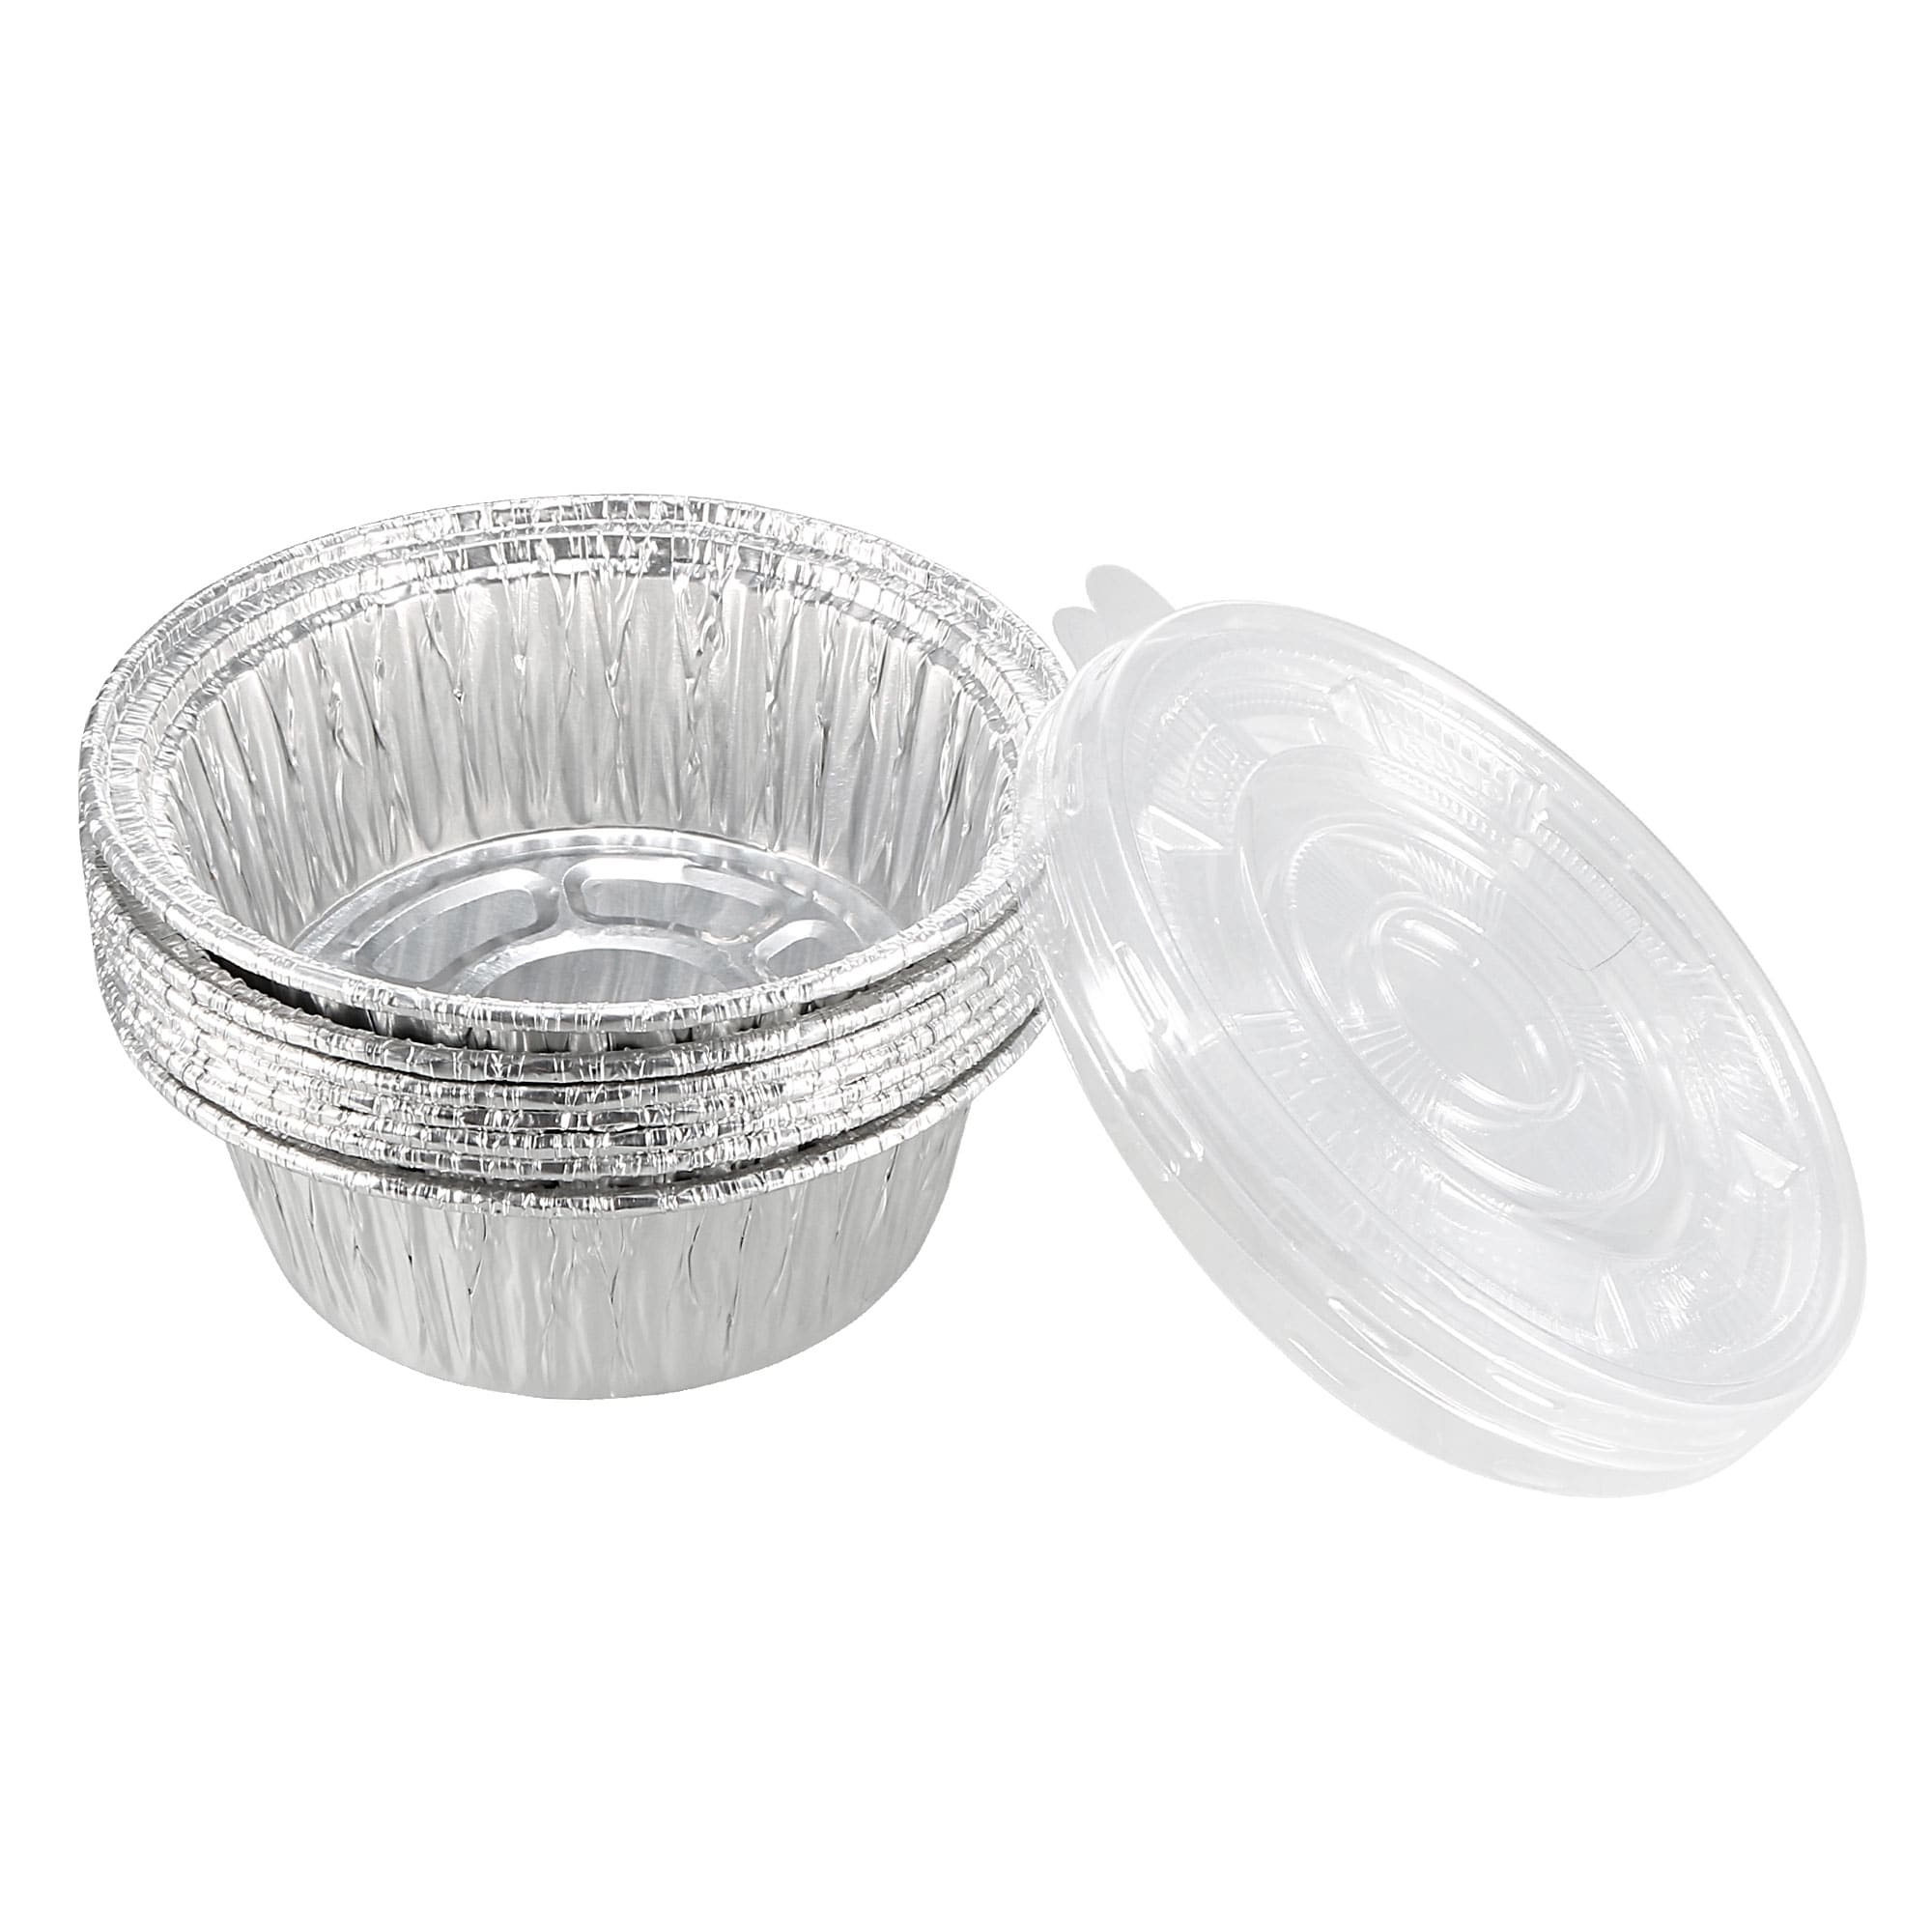 https://ak1.ostkcdn.com/images/products/is/images/direct/51b0b18107690c6258e74c20d4c98ed5b6d65063/4.8%22-Round-Aluminum-Foil-Pan-with-Clear-Lid%2C-8.8oz-Disposable-Containers-12pcs.jpg